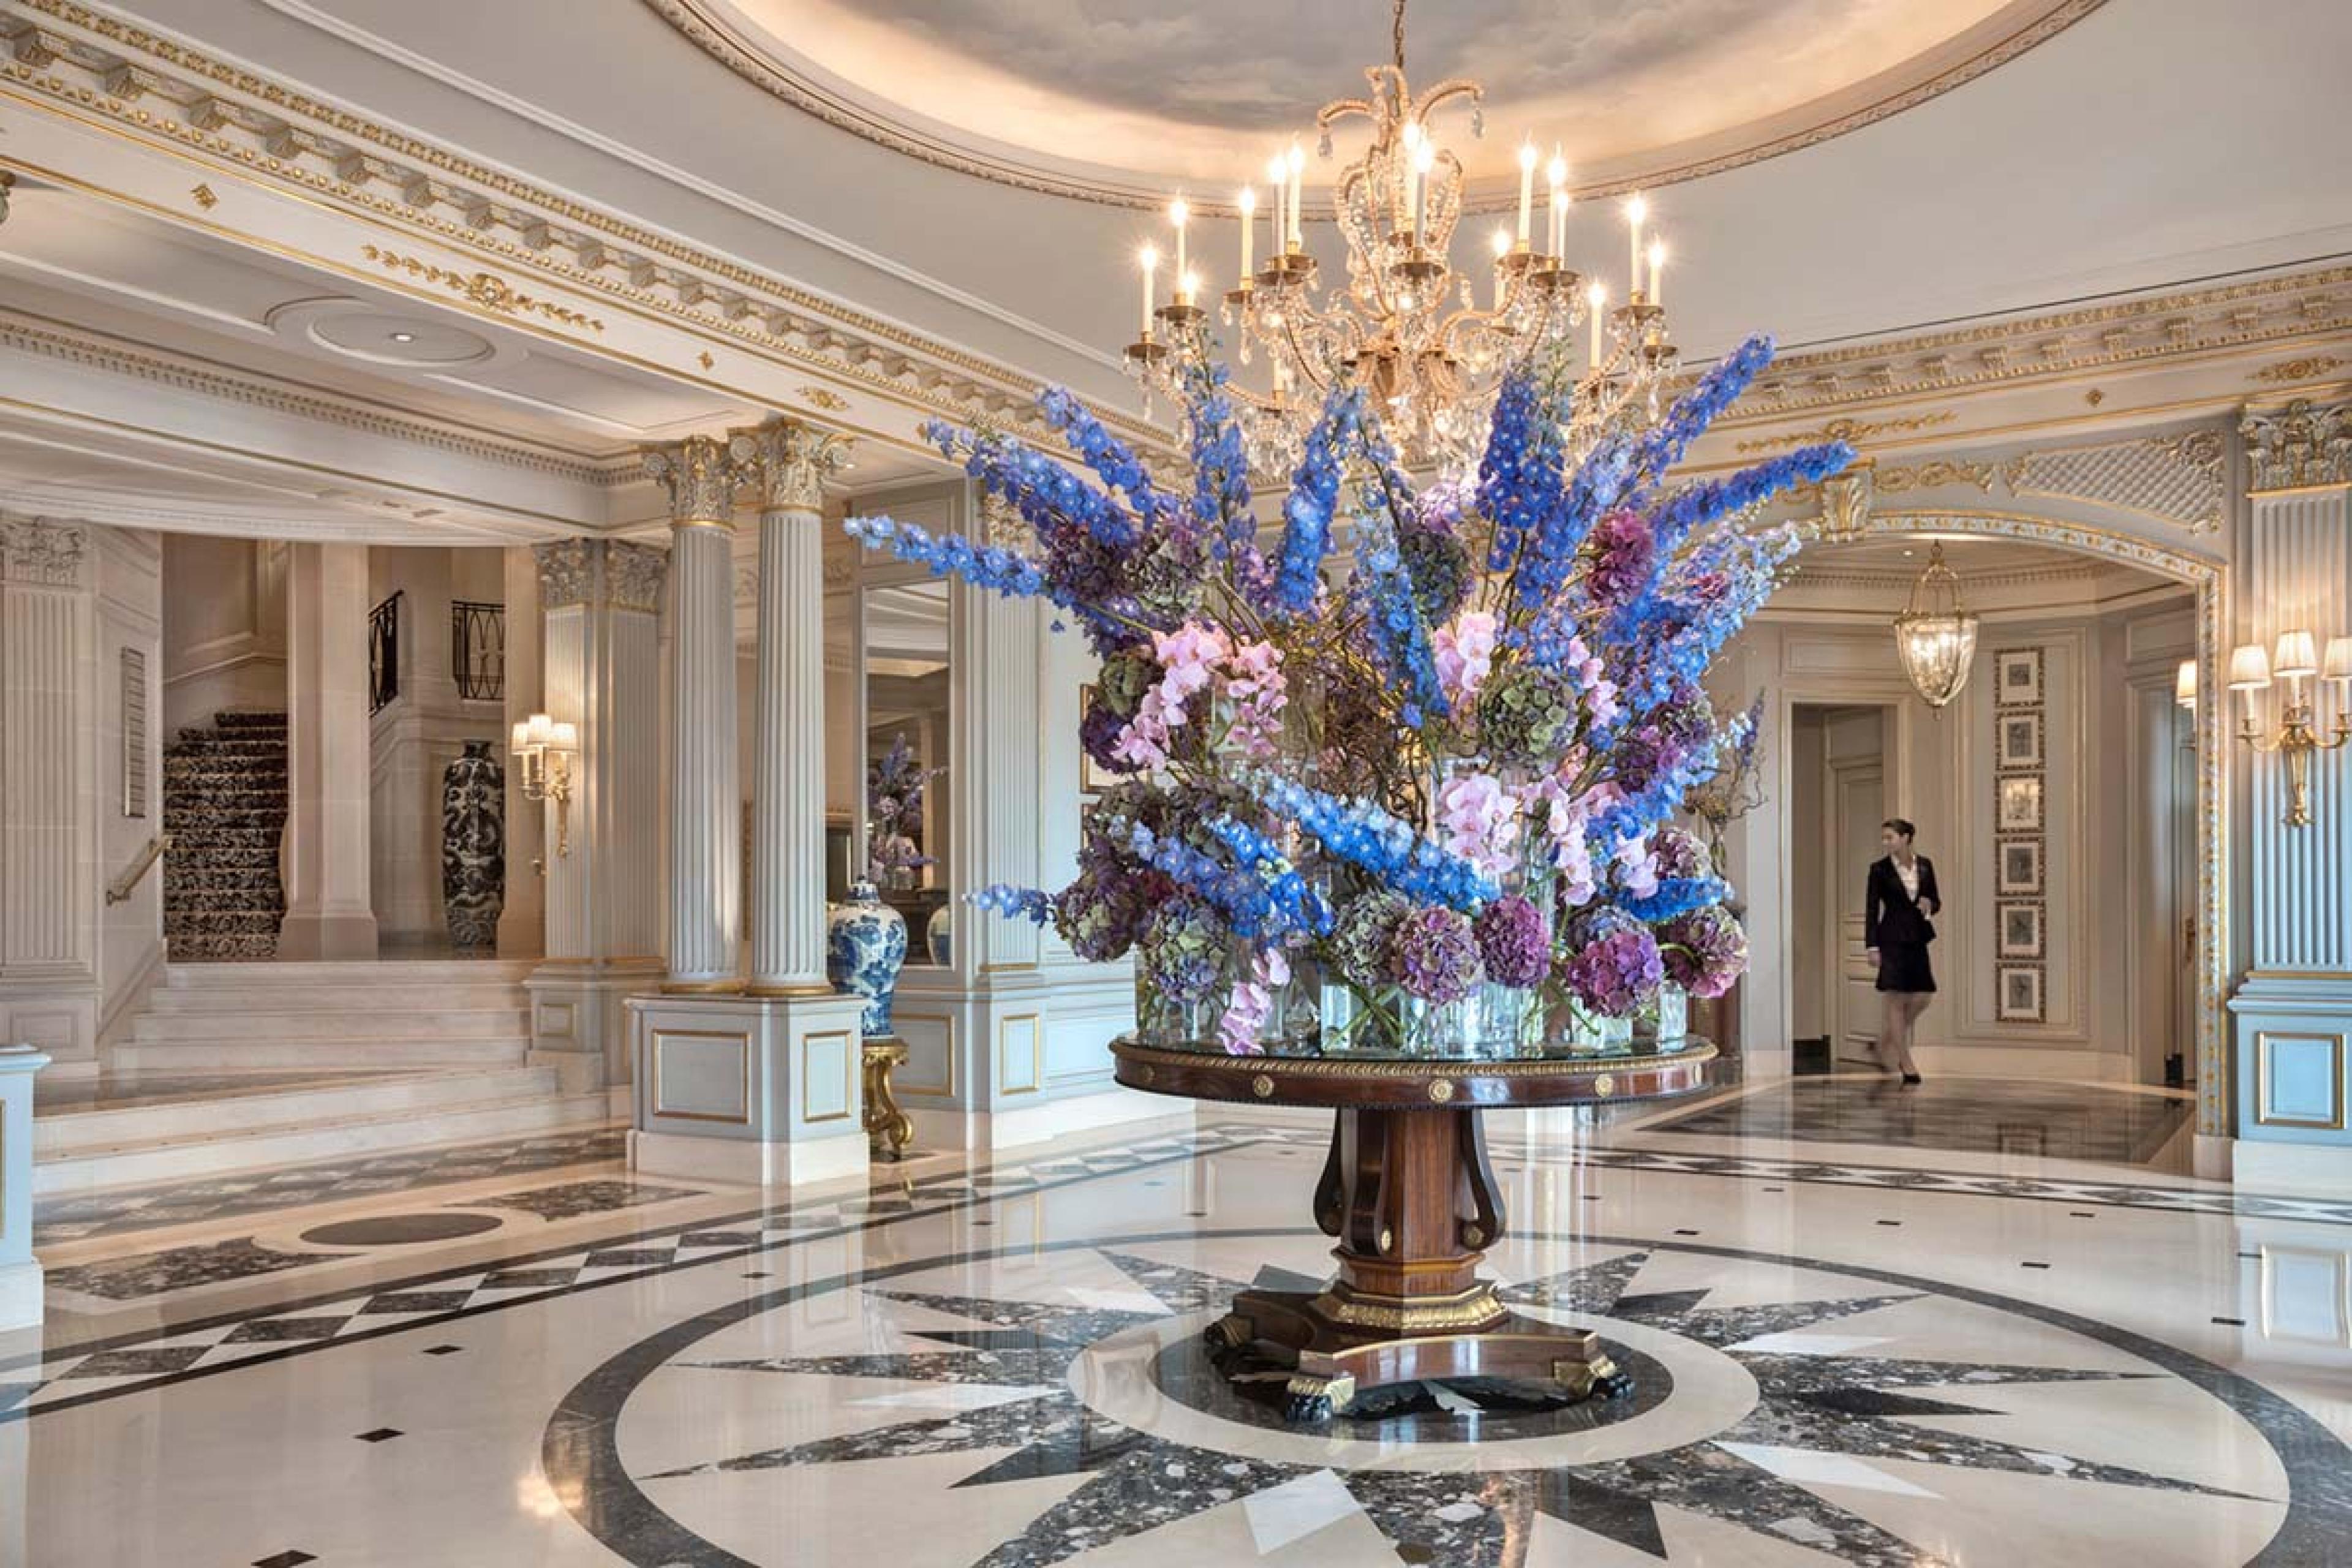 lobby with a large purple and blue flower center piece